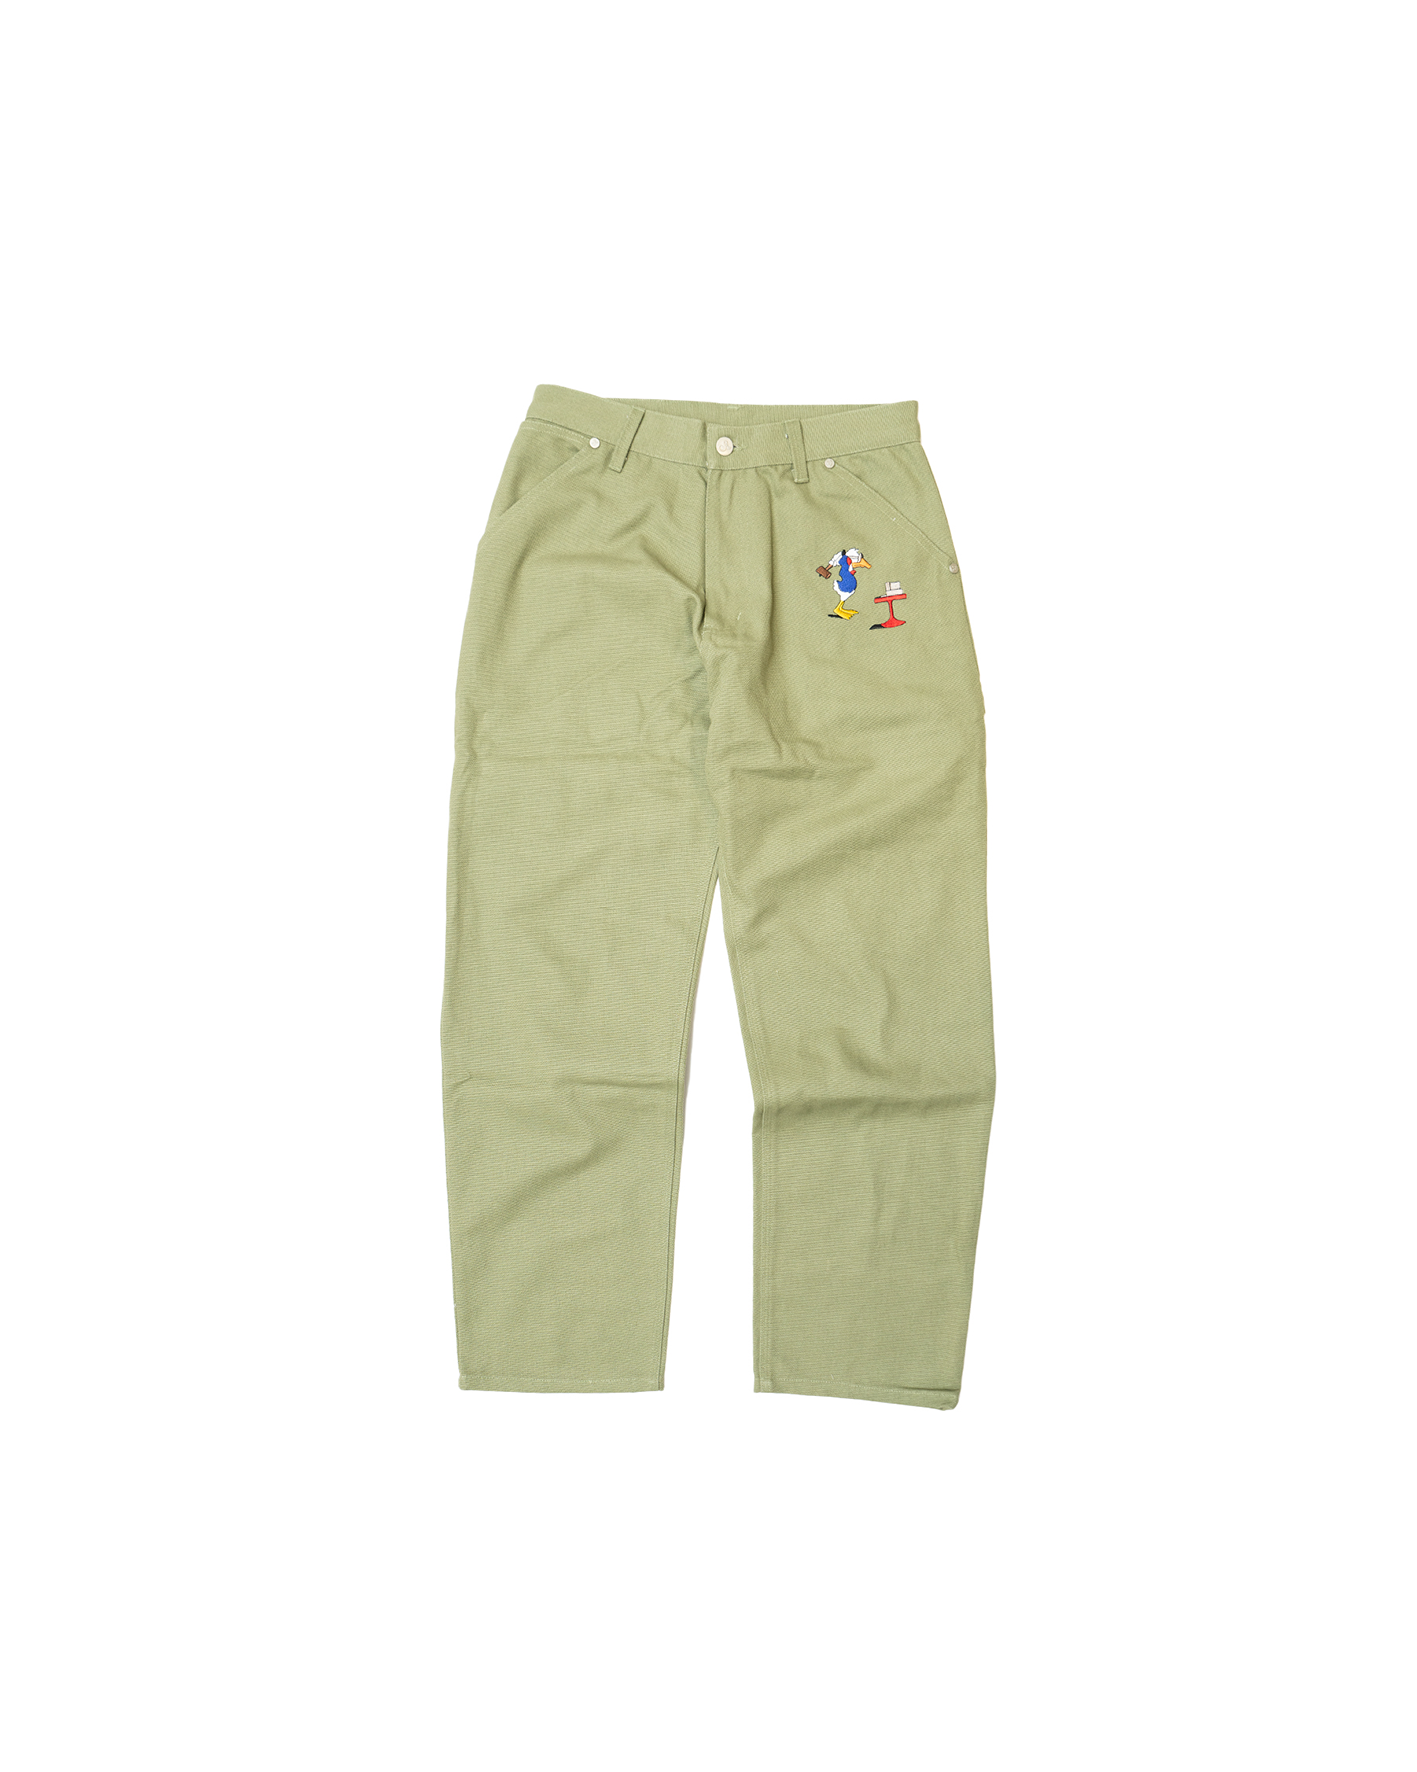 DUCK WORK PANTS OLIVE